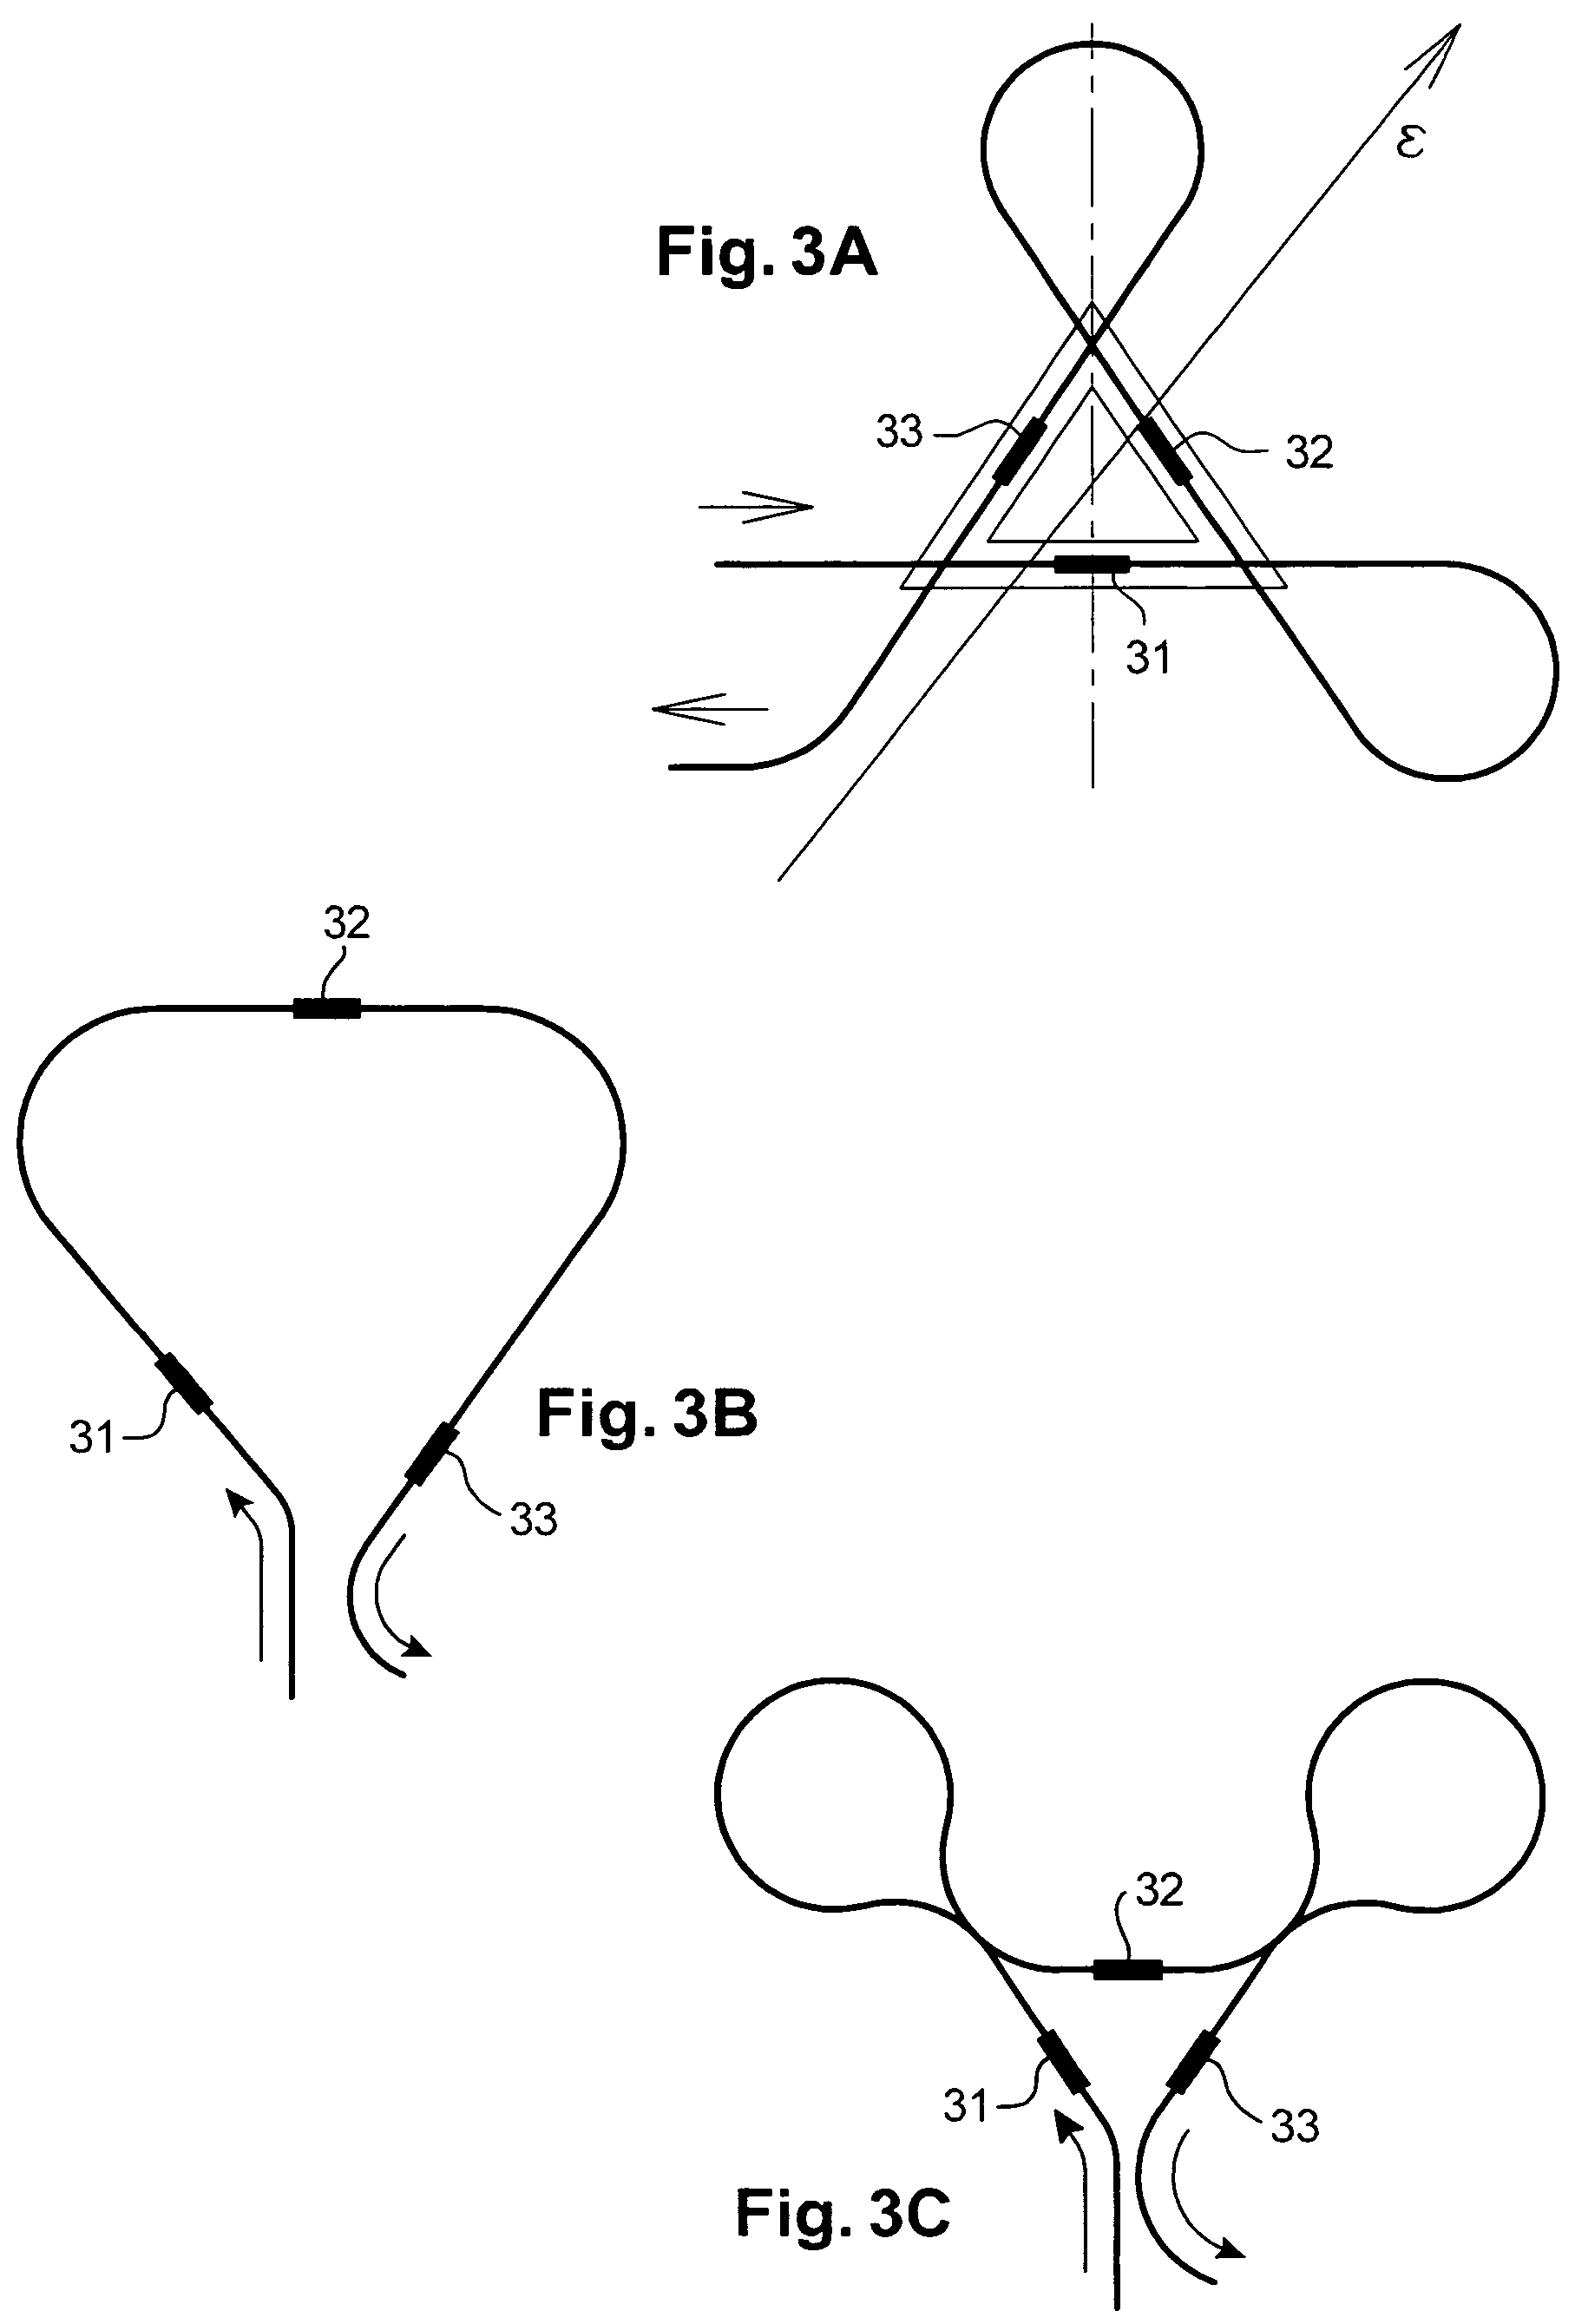 Instrumented tabular device for transporting a pressurized fluid